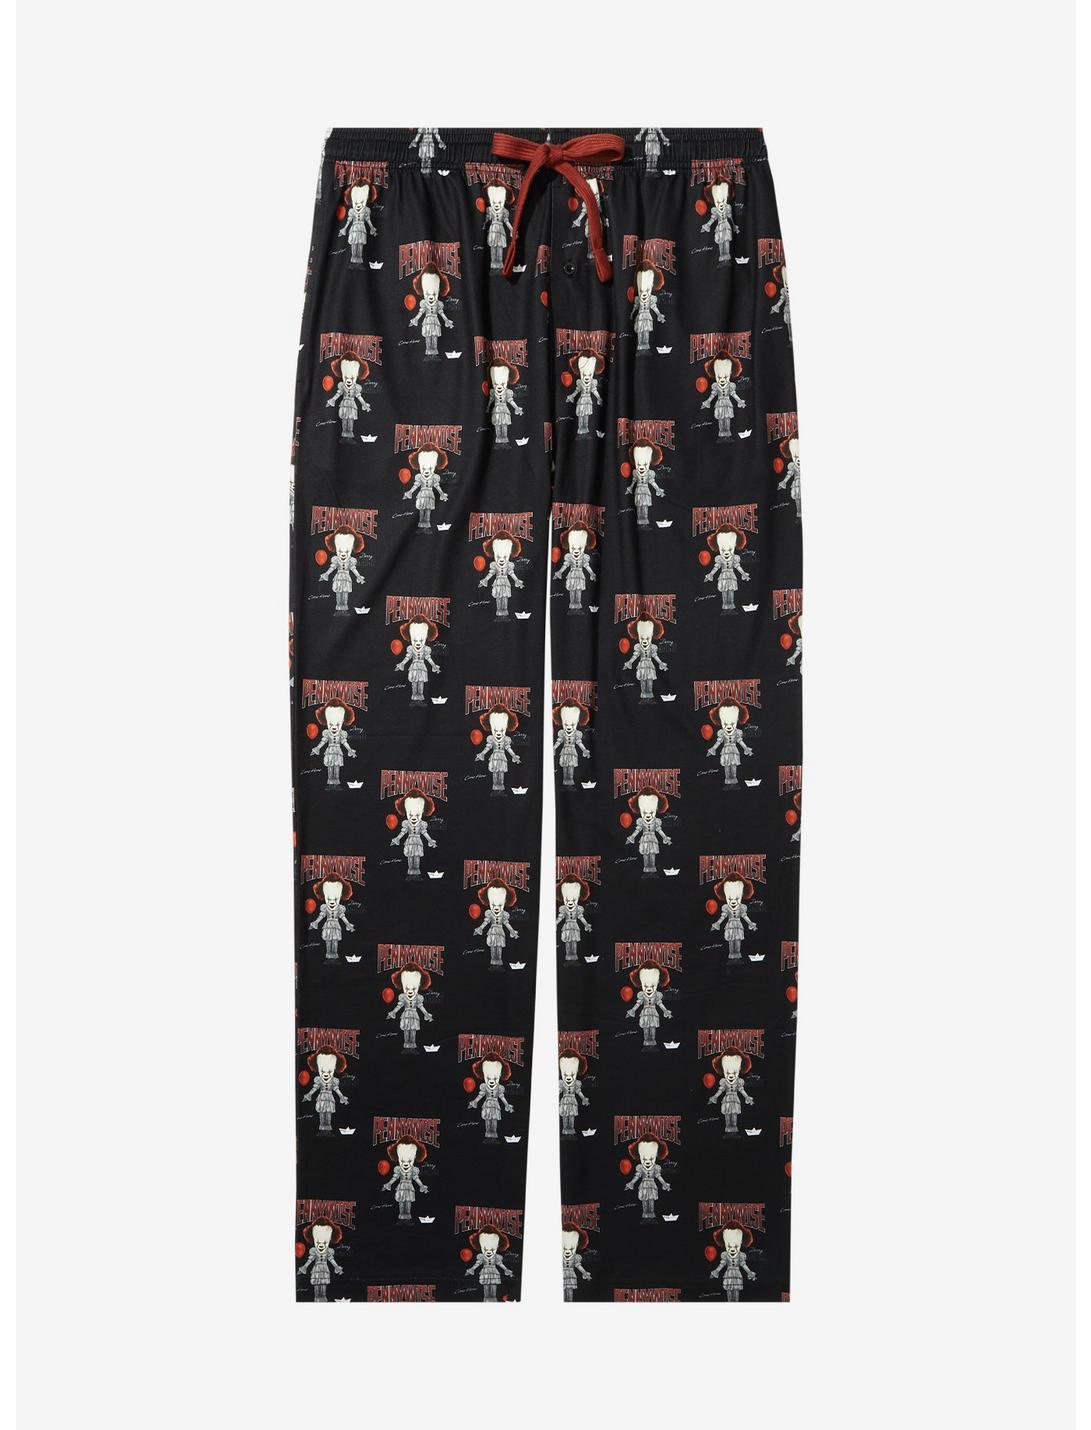 It Pennywise Allover Print Plus Size Sleep Pants - BoxLunch Exclusive, BLACK, hi-res